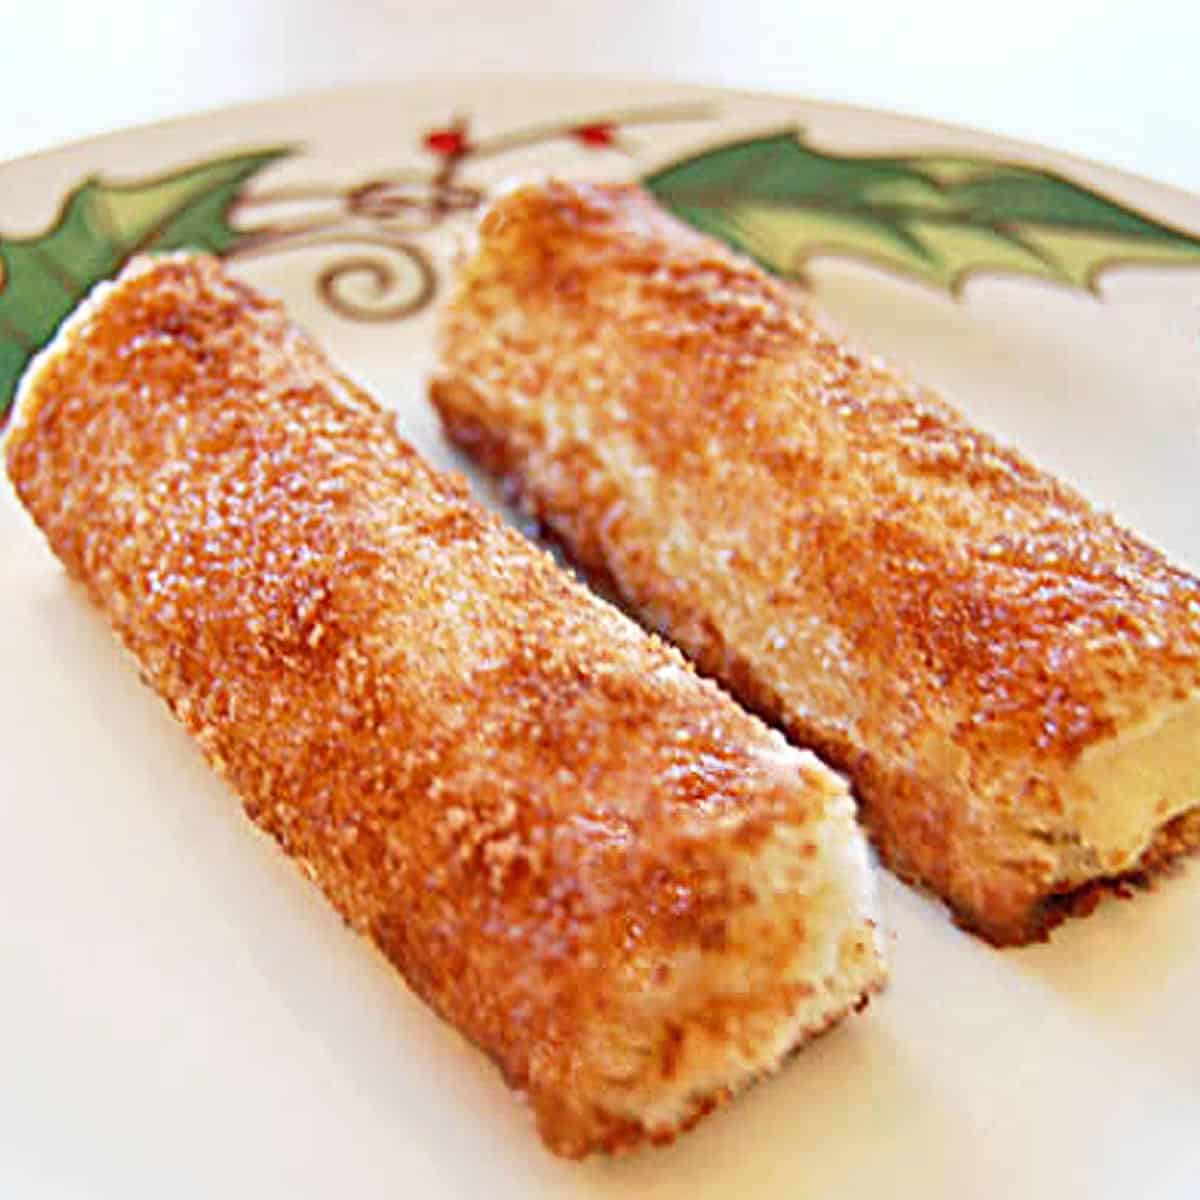 Two cream cheese roll ups on a green and white plate.